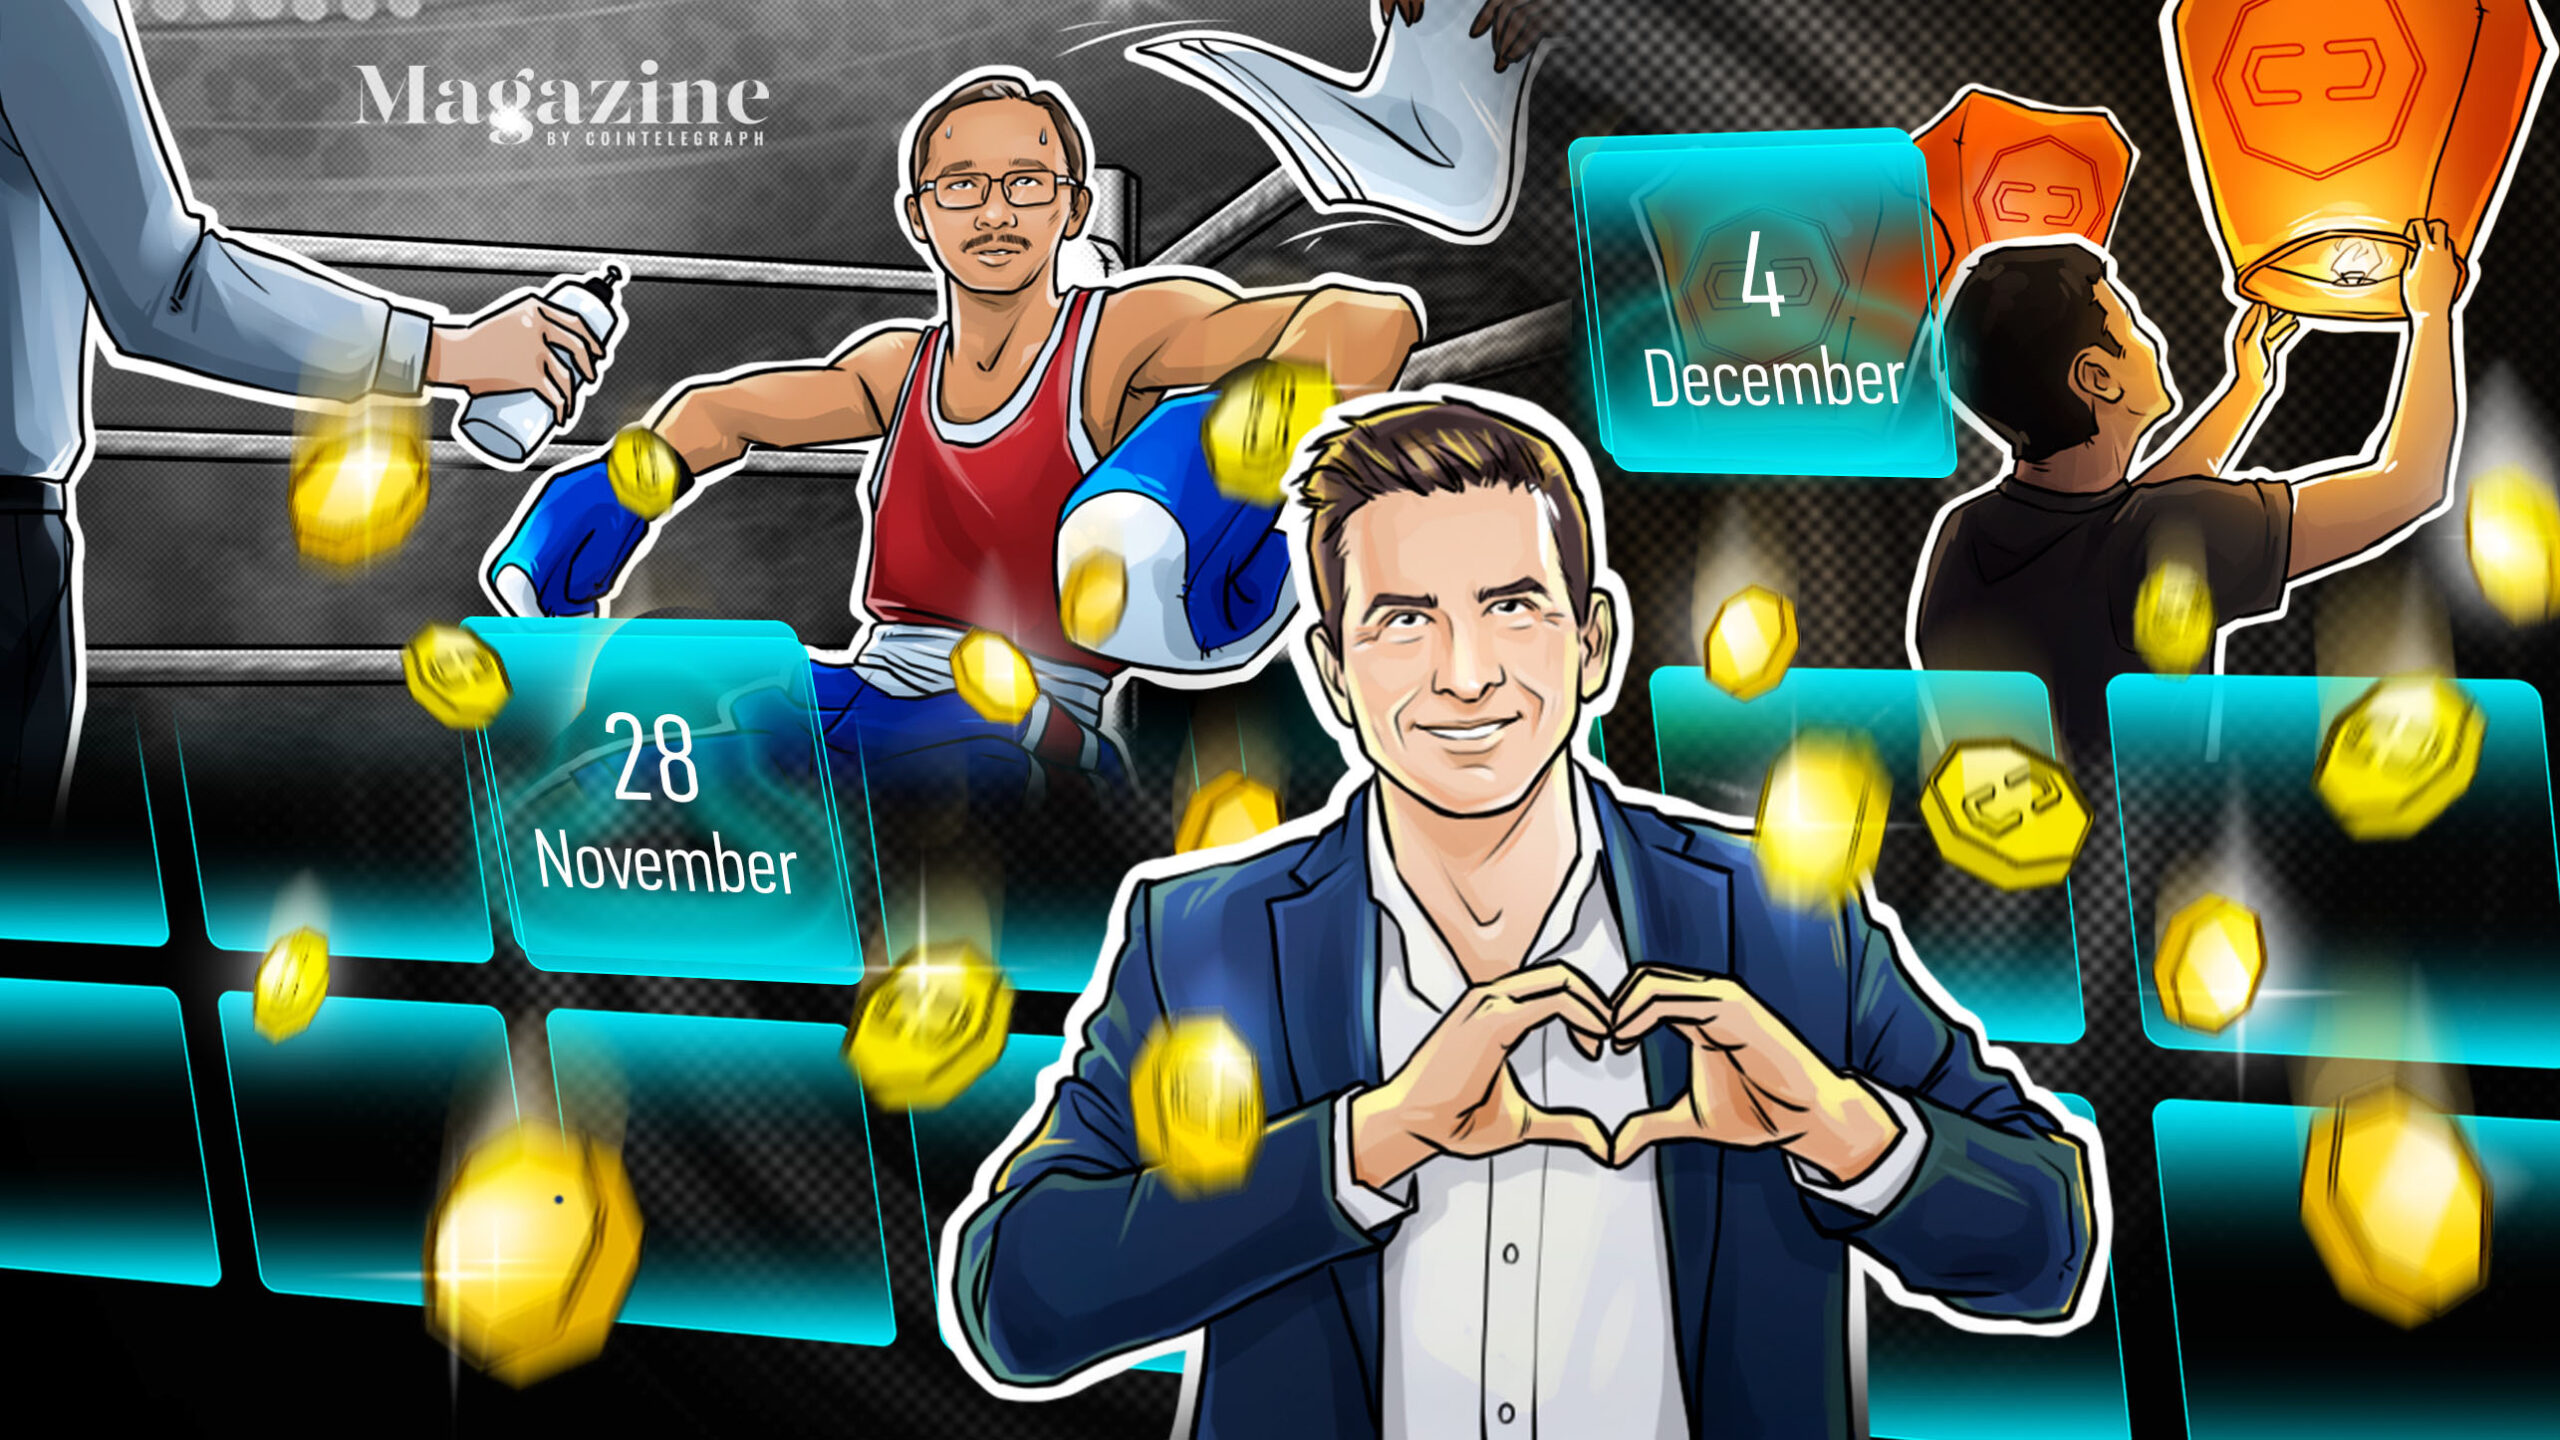 Jack-dorsey-steps-down-from-twitter,-microstrategy-snaps-up-7k-btc-and-square-rebrands-to-block:-hodler’s-digest,-nov-28-dec.-4